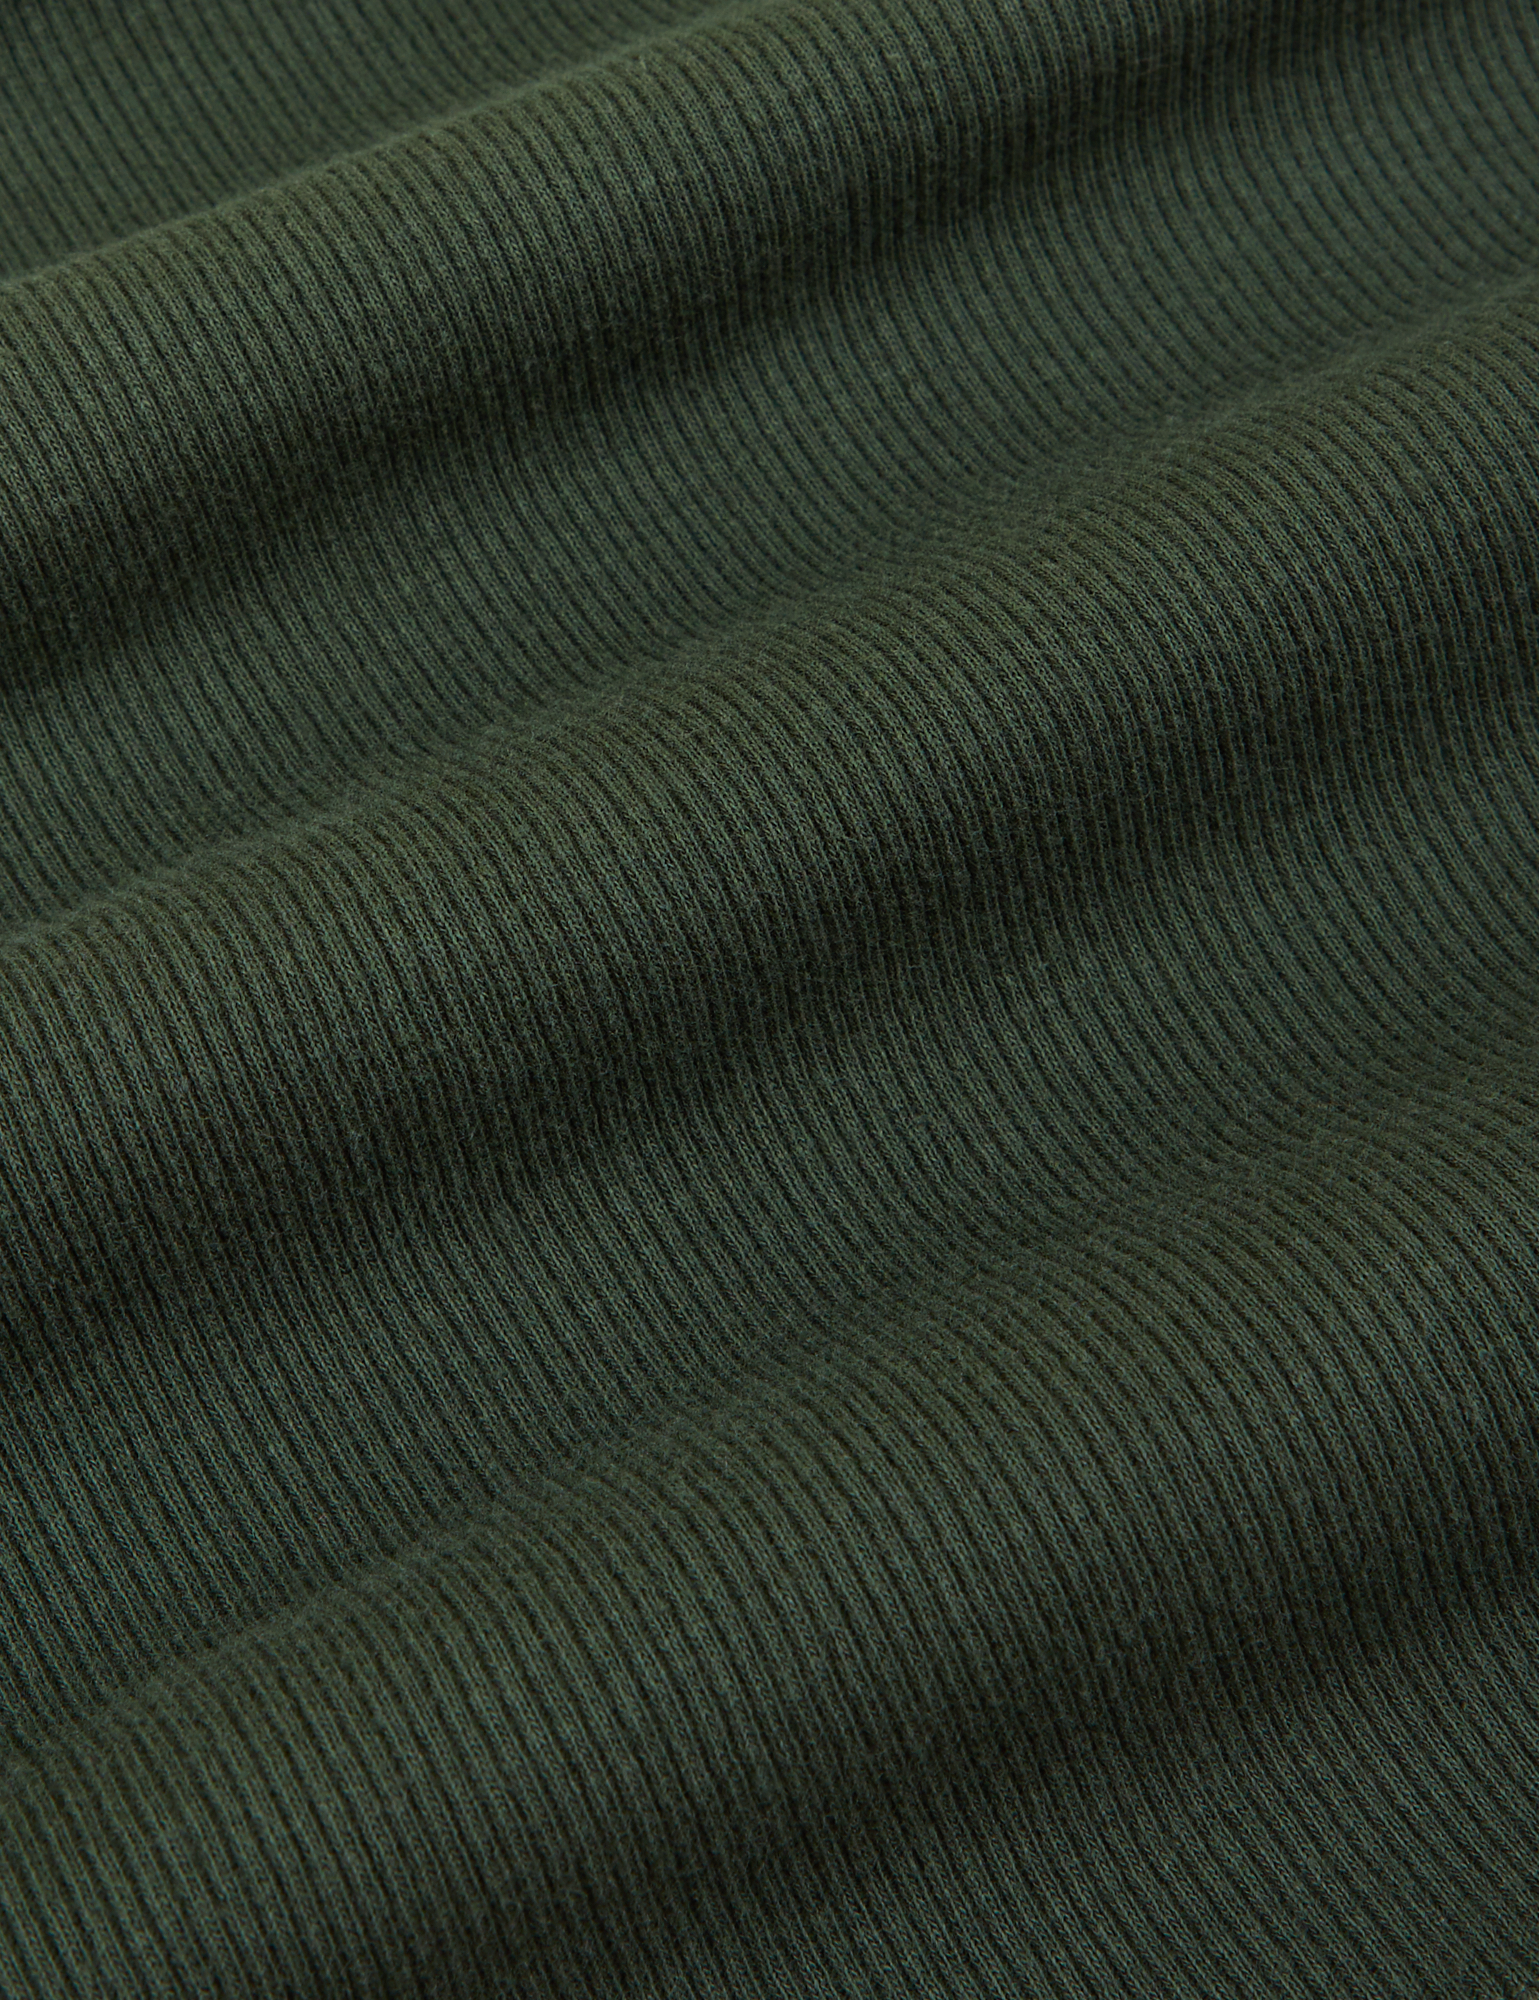 Muscle Tee in Swamp Green fabric detail close up